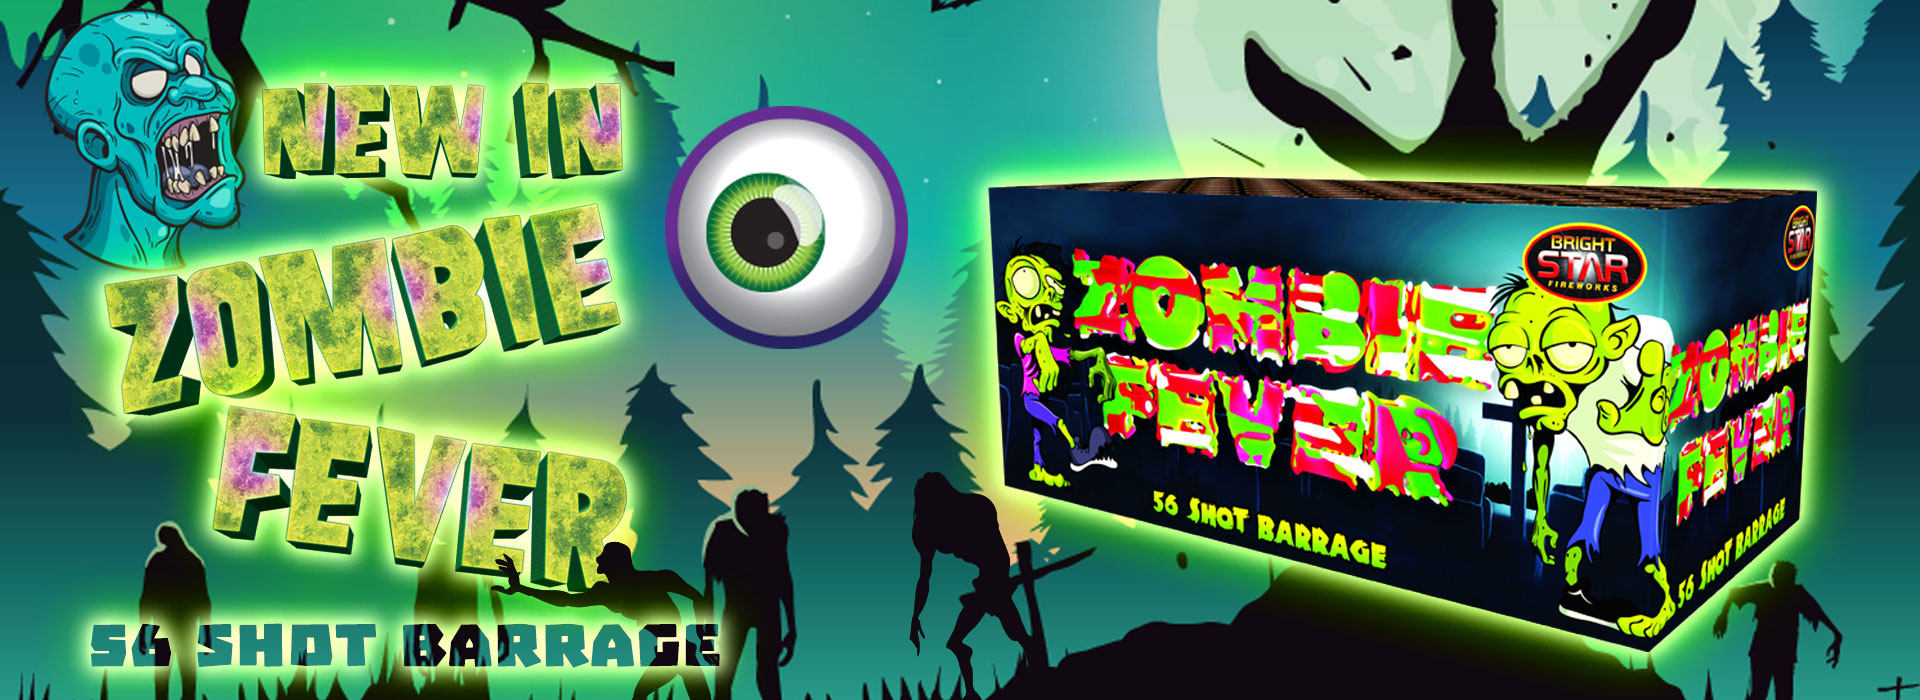 New and latest fireworks in stock - Zombie Fever